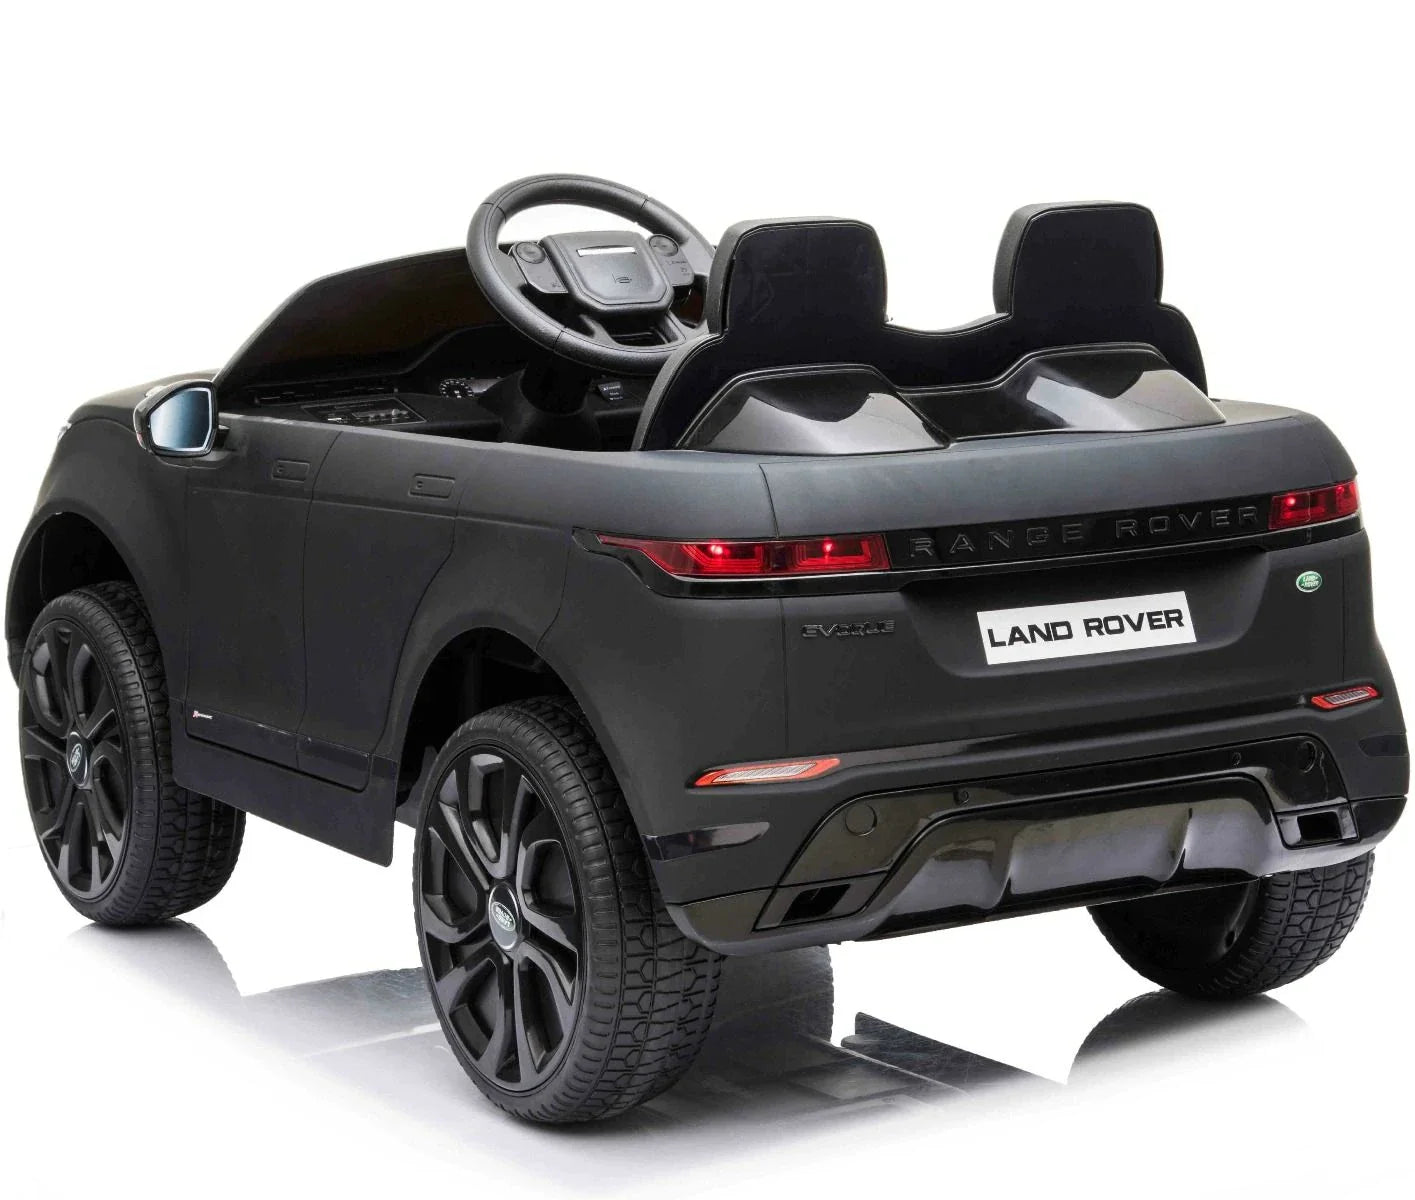 Matte Black Range Rover Evoque model, kids electric ride on car with parental control, isolated on white background.